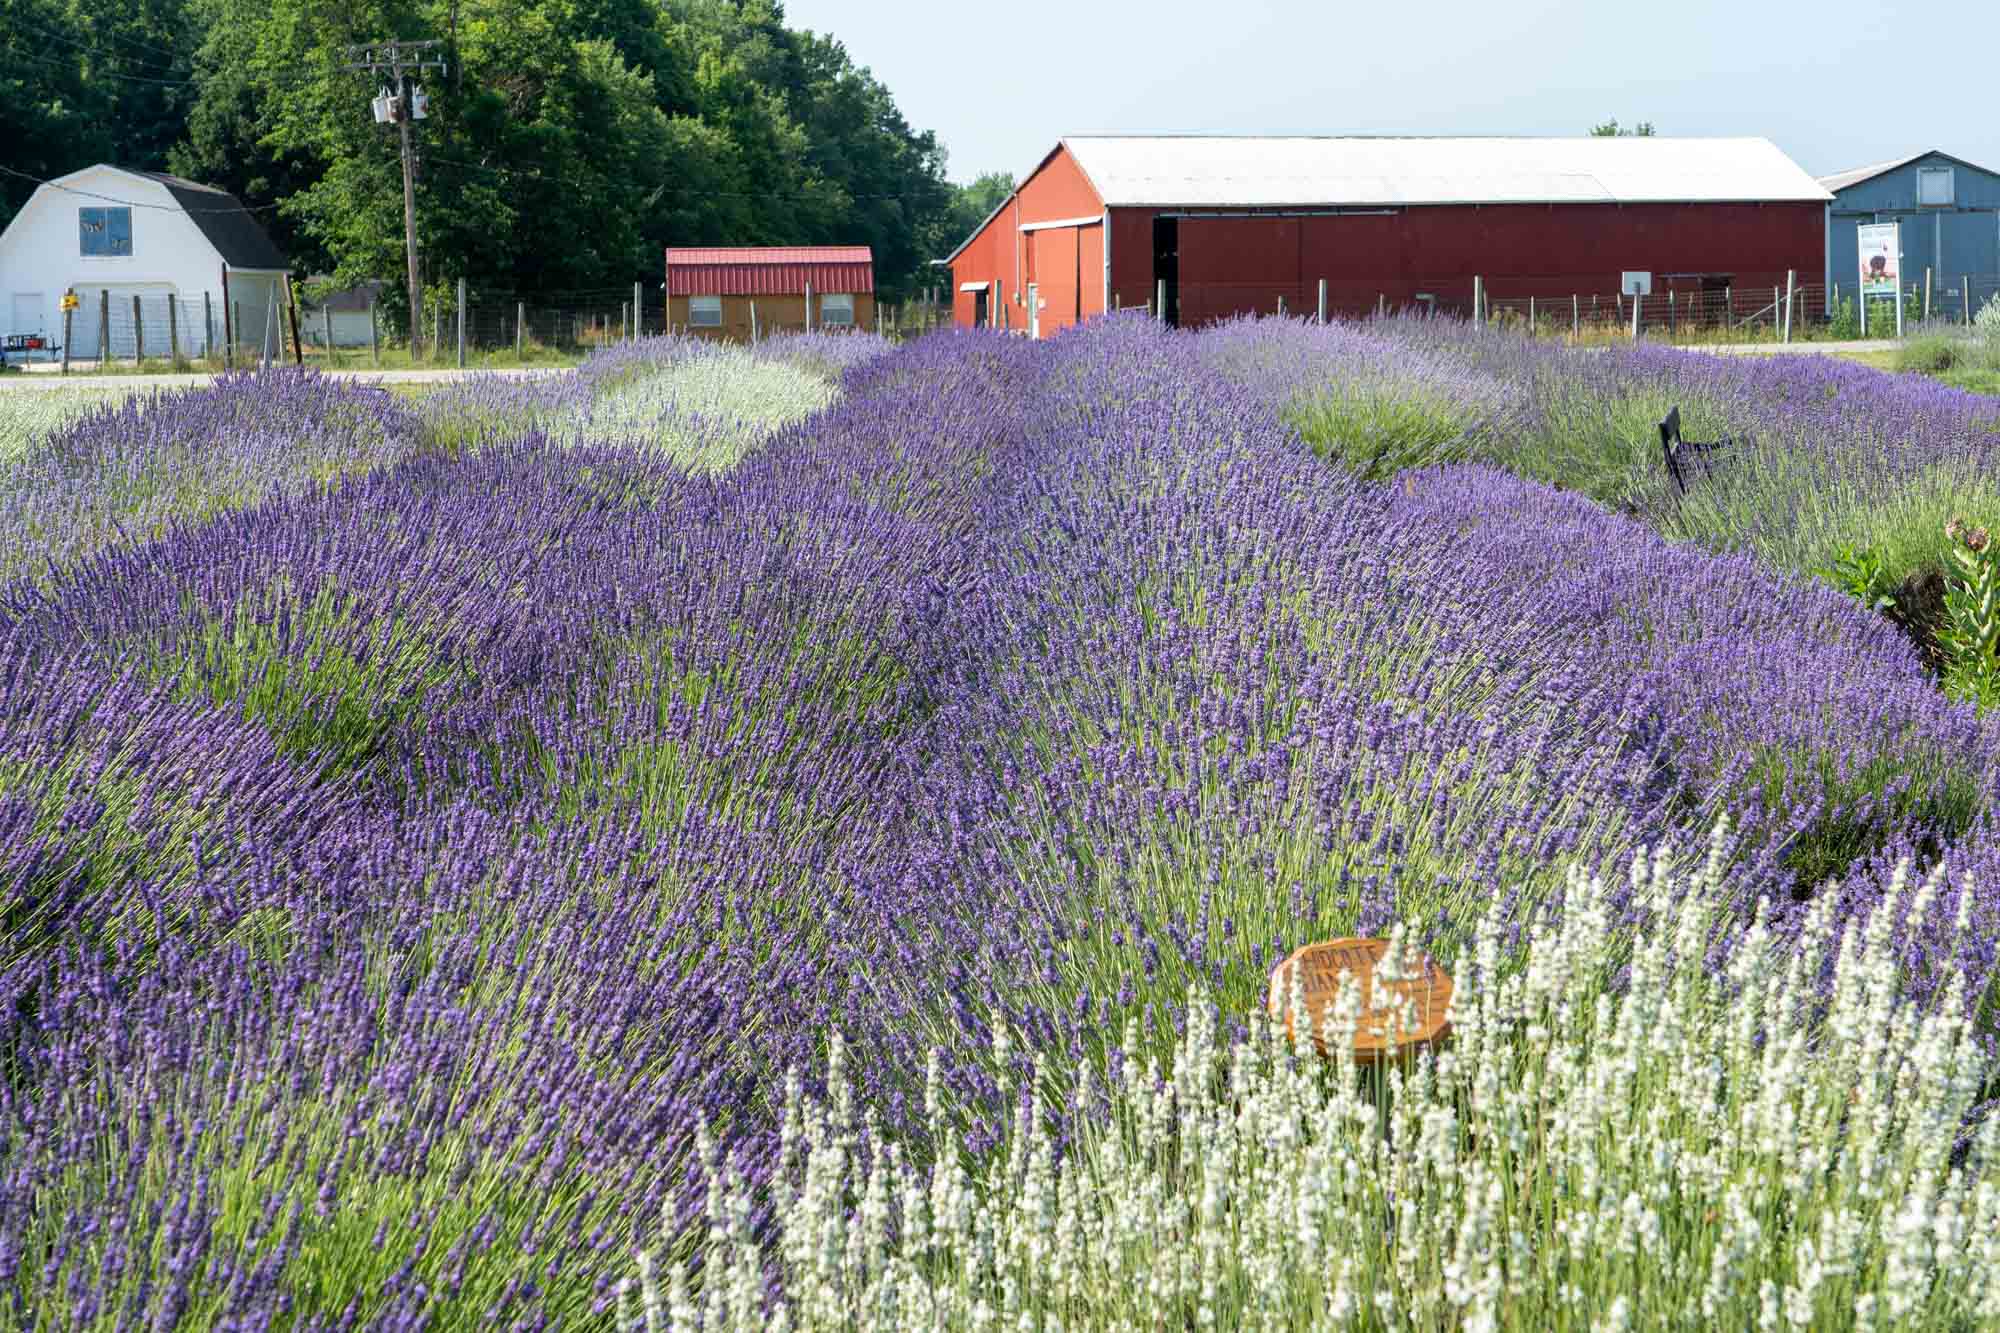 Read more about the article Visiting Luvin Lavender Farms: A Summertime Must-Do in Northeast Ohio